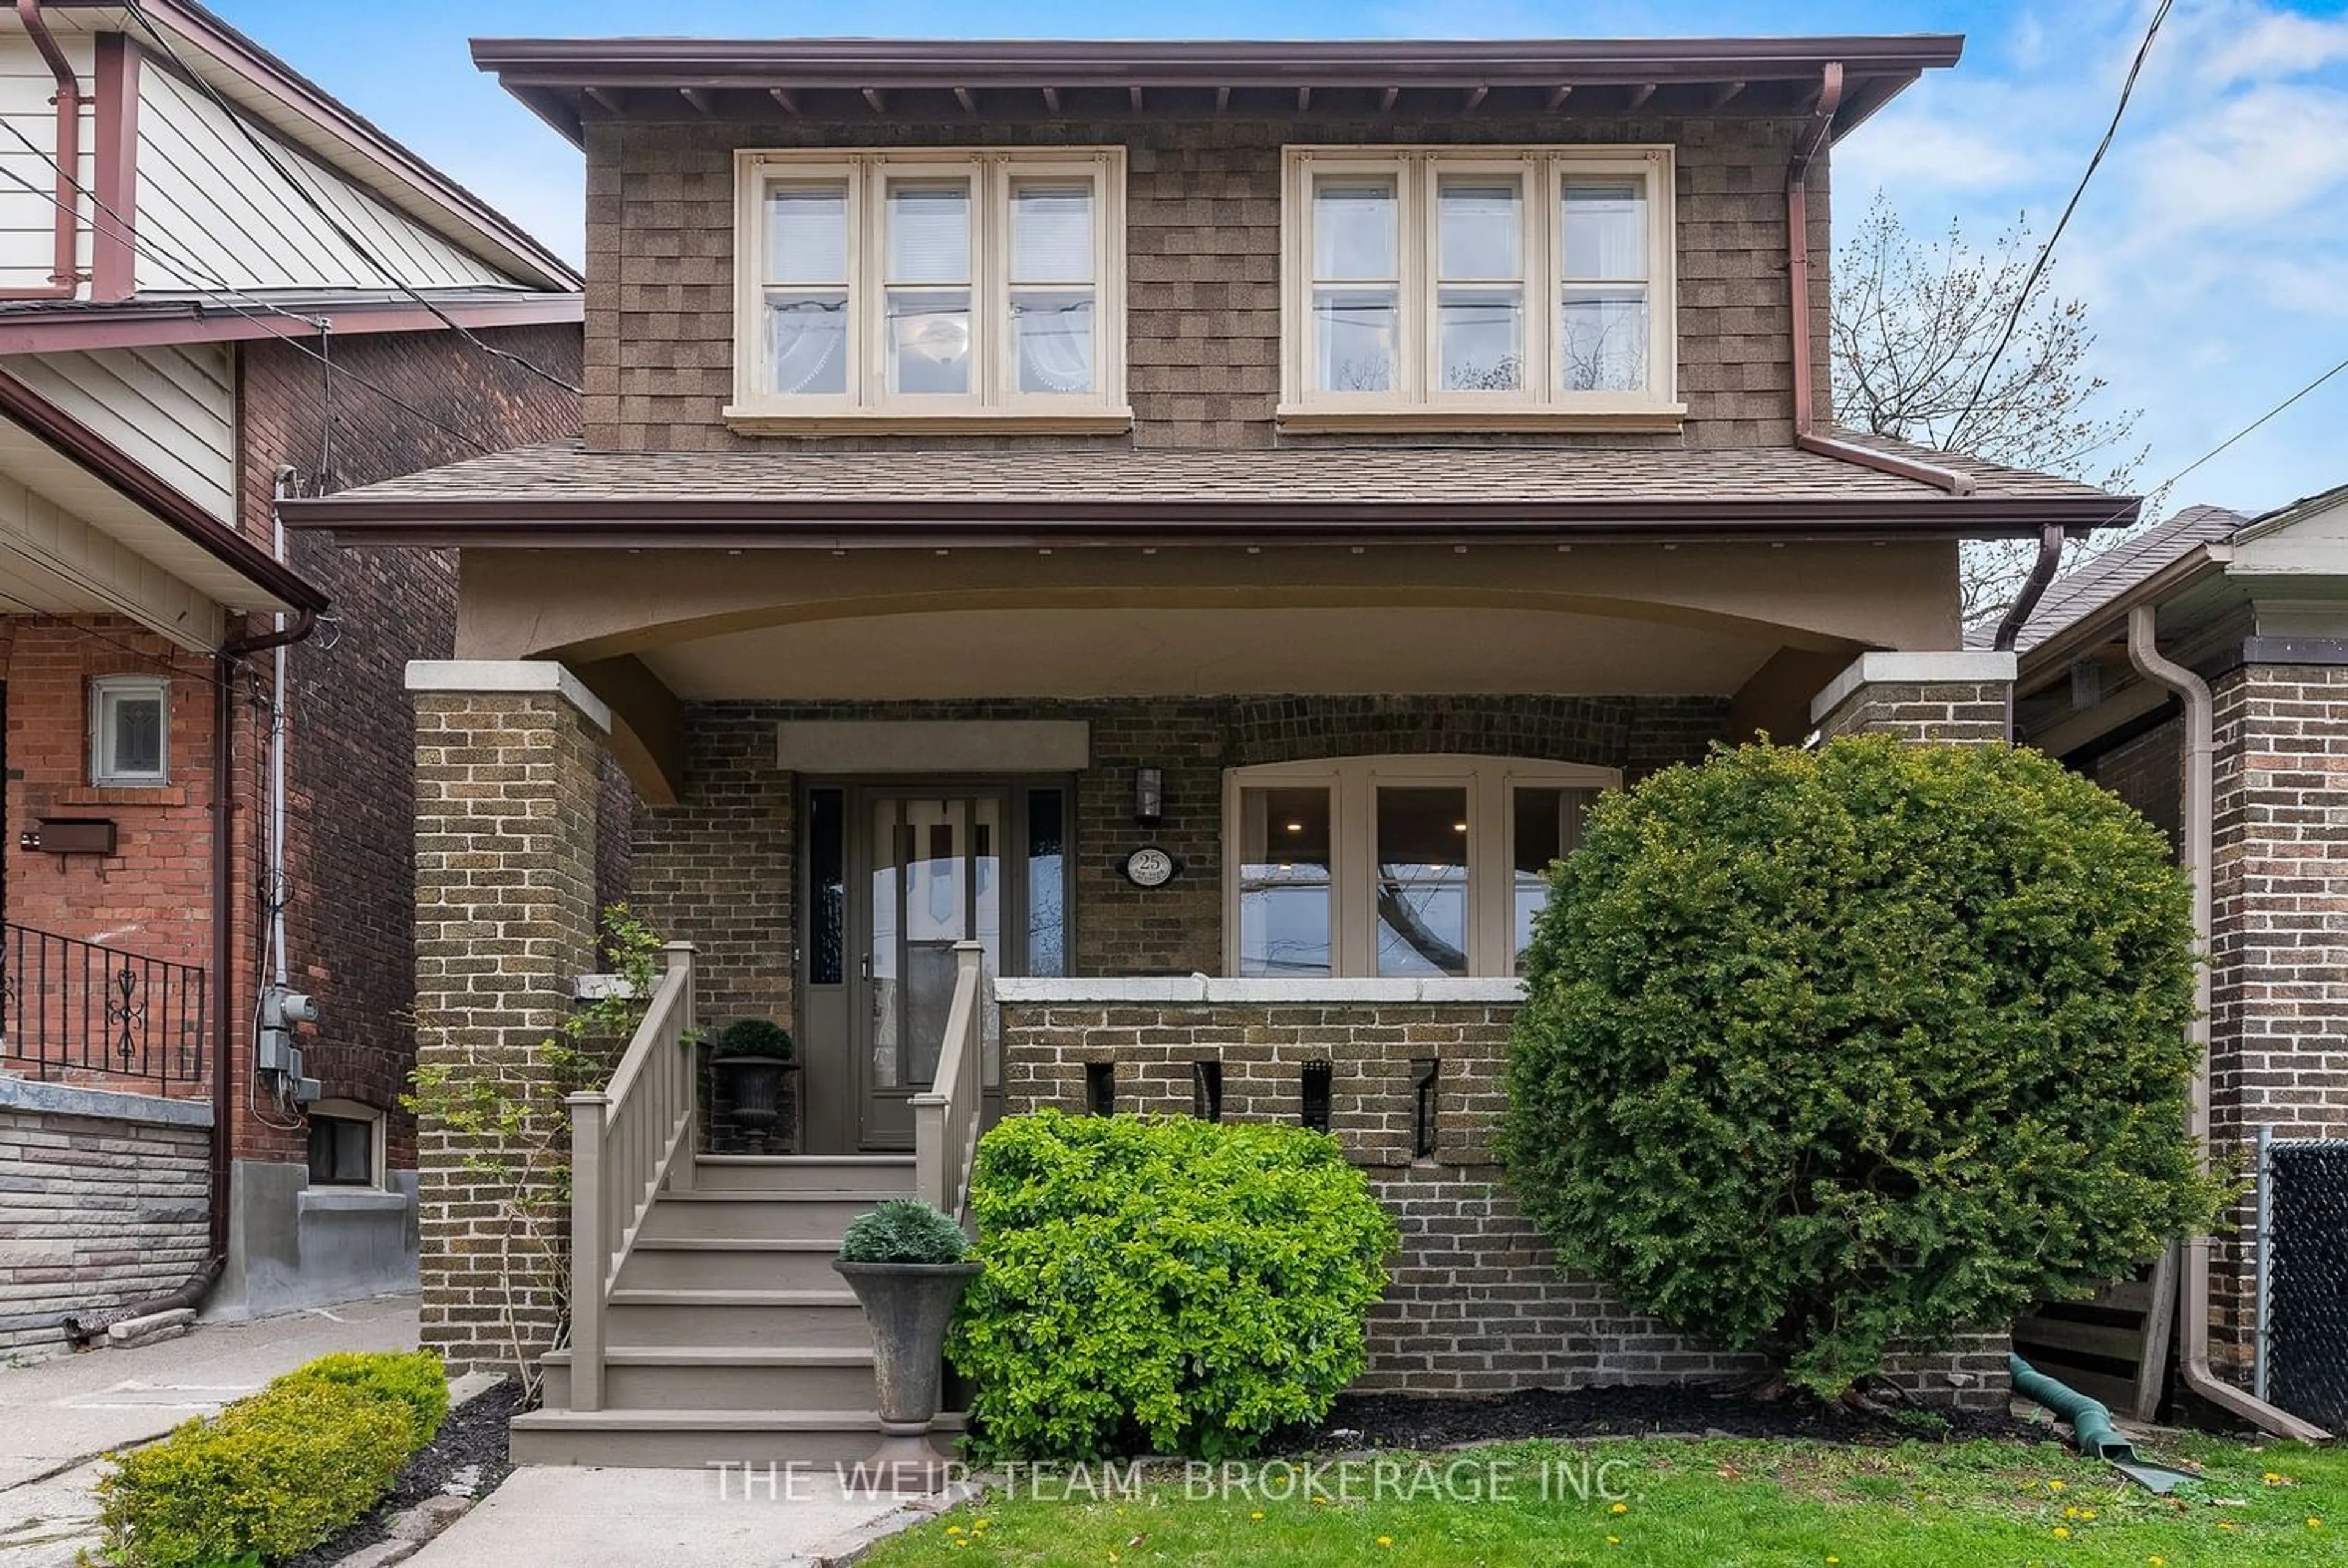 Home with brick exterior material for 25 Oak Park Ave, Toronto Ontario M4C 4L8